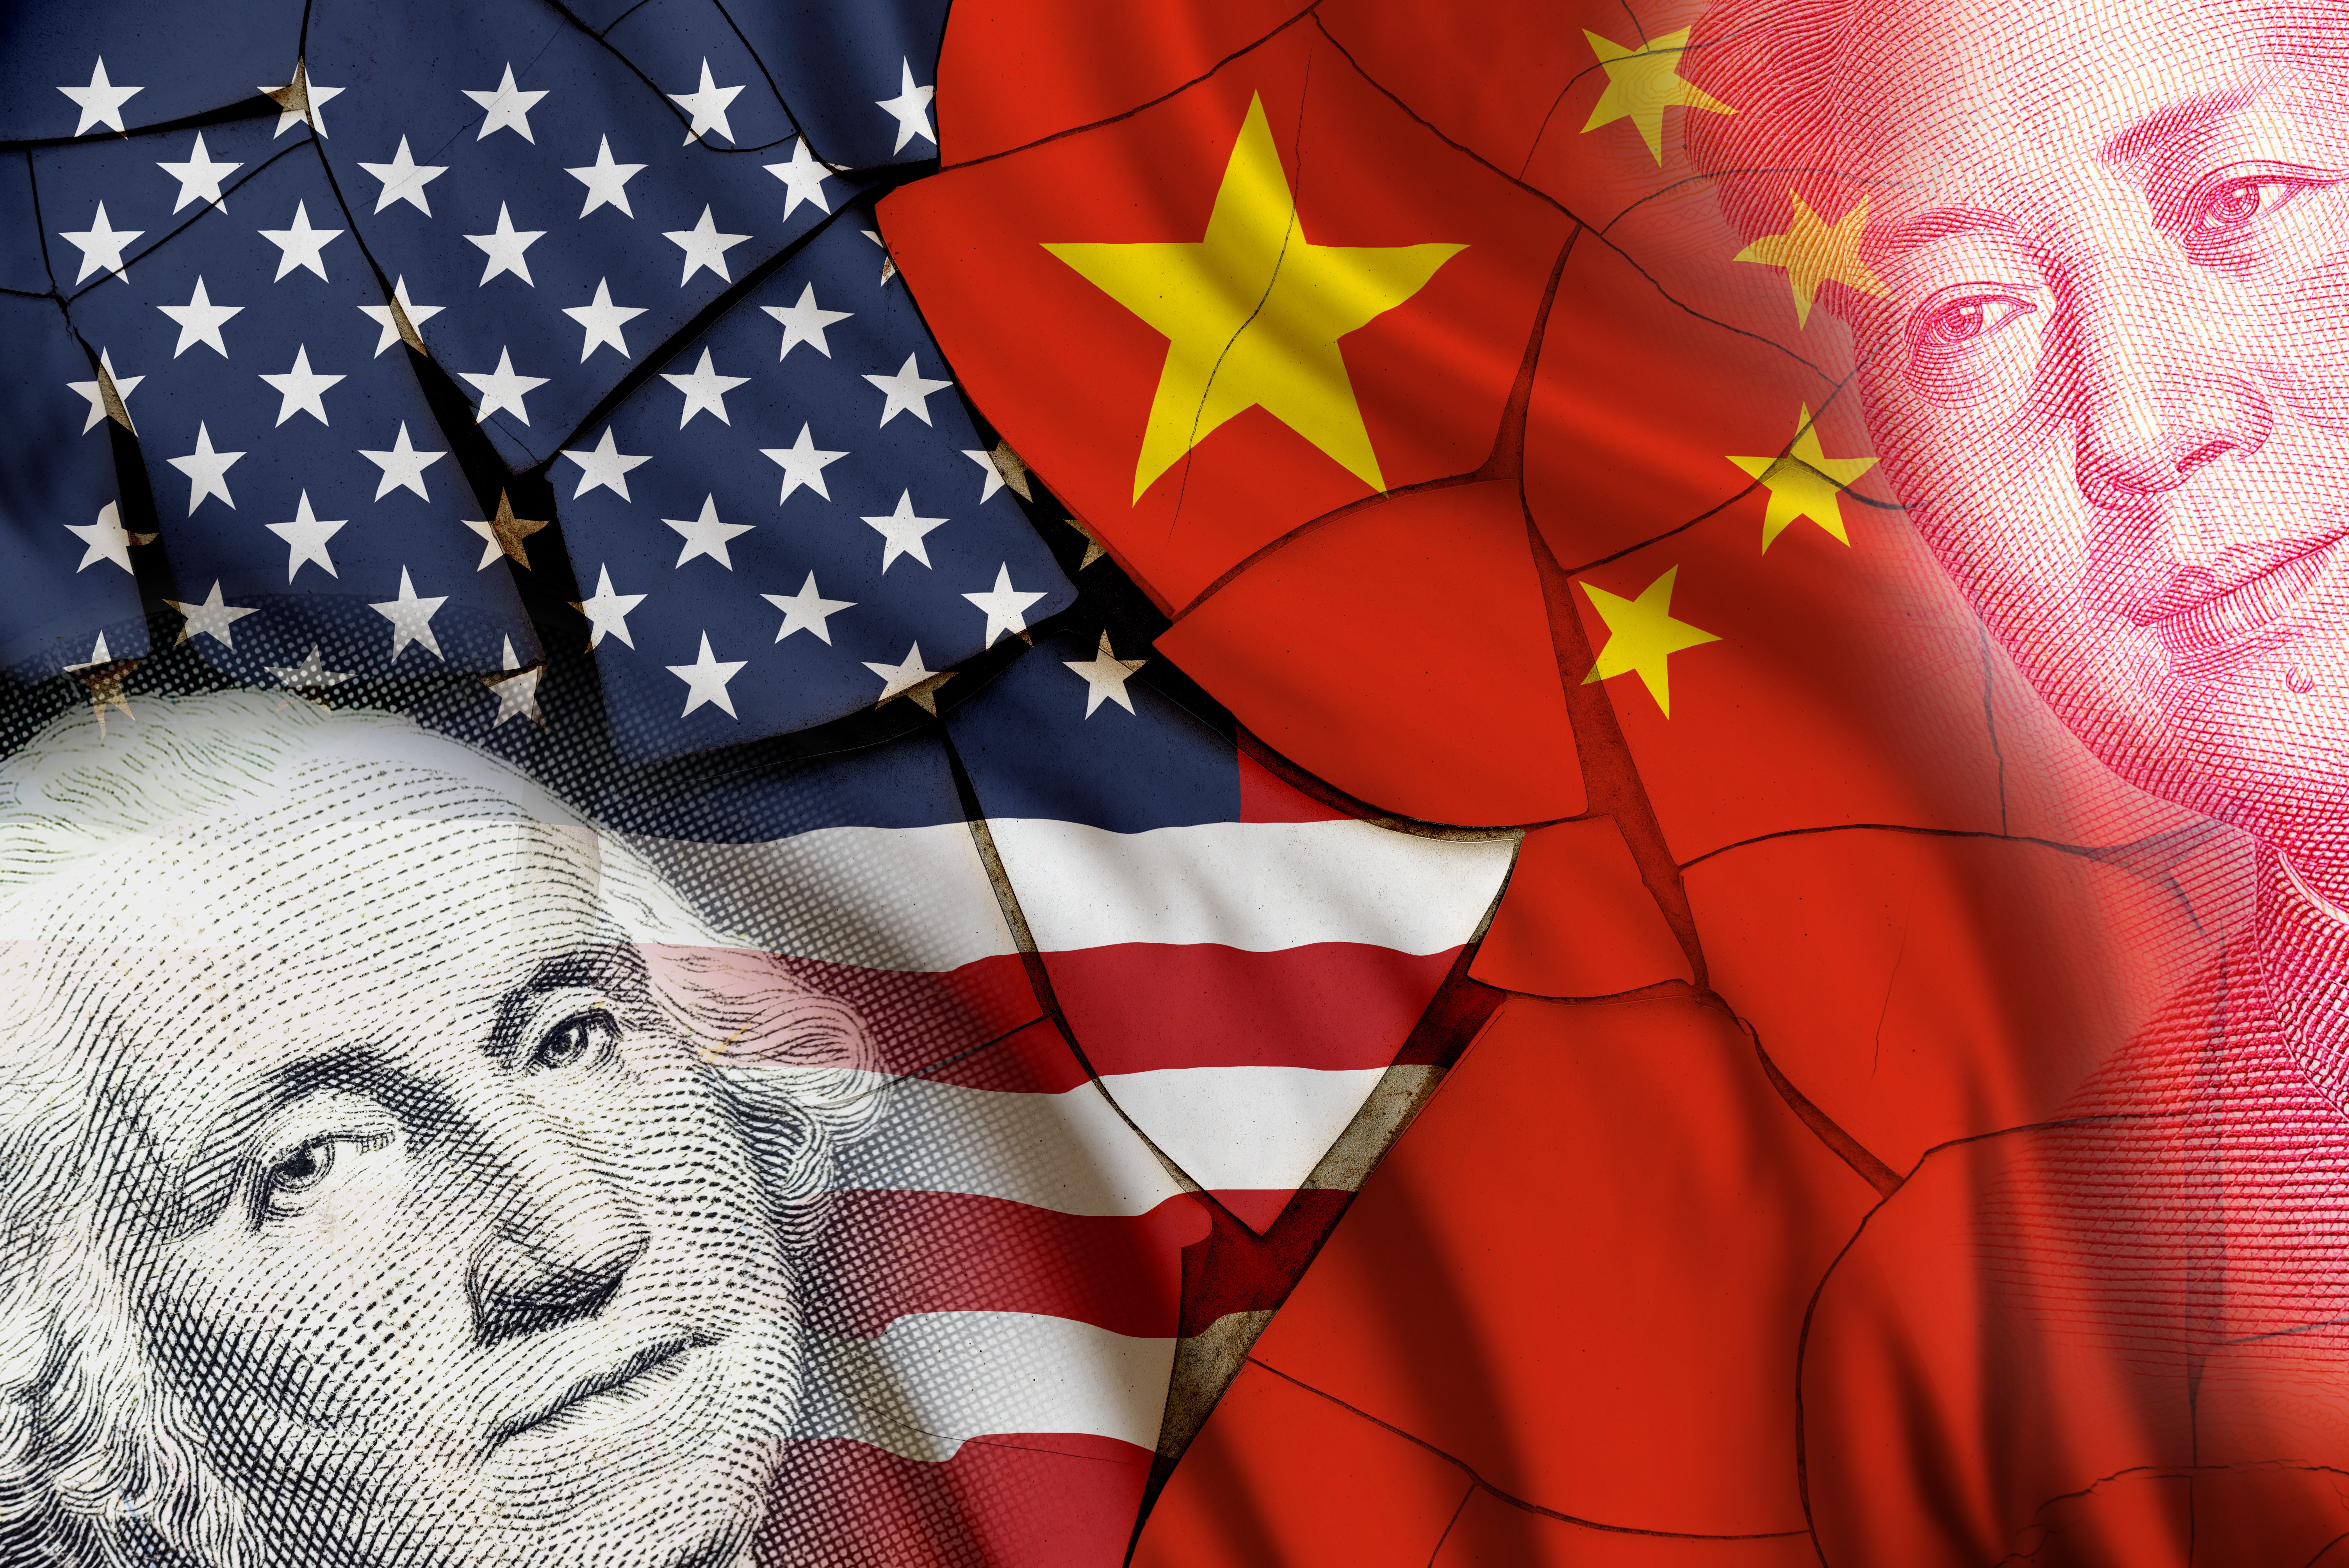 The approach of the US and China differs vastly in reducing the trade deficit between the two countries. Photo: Shutterstock